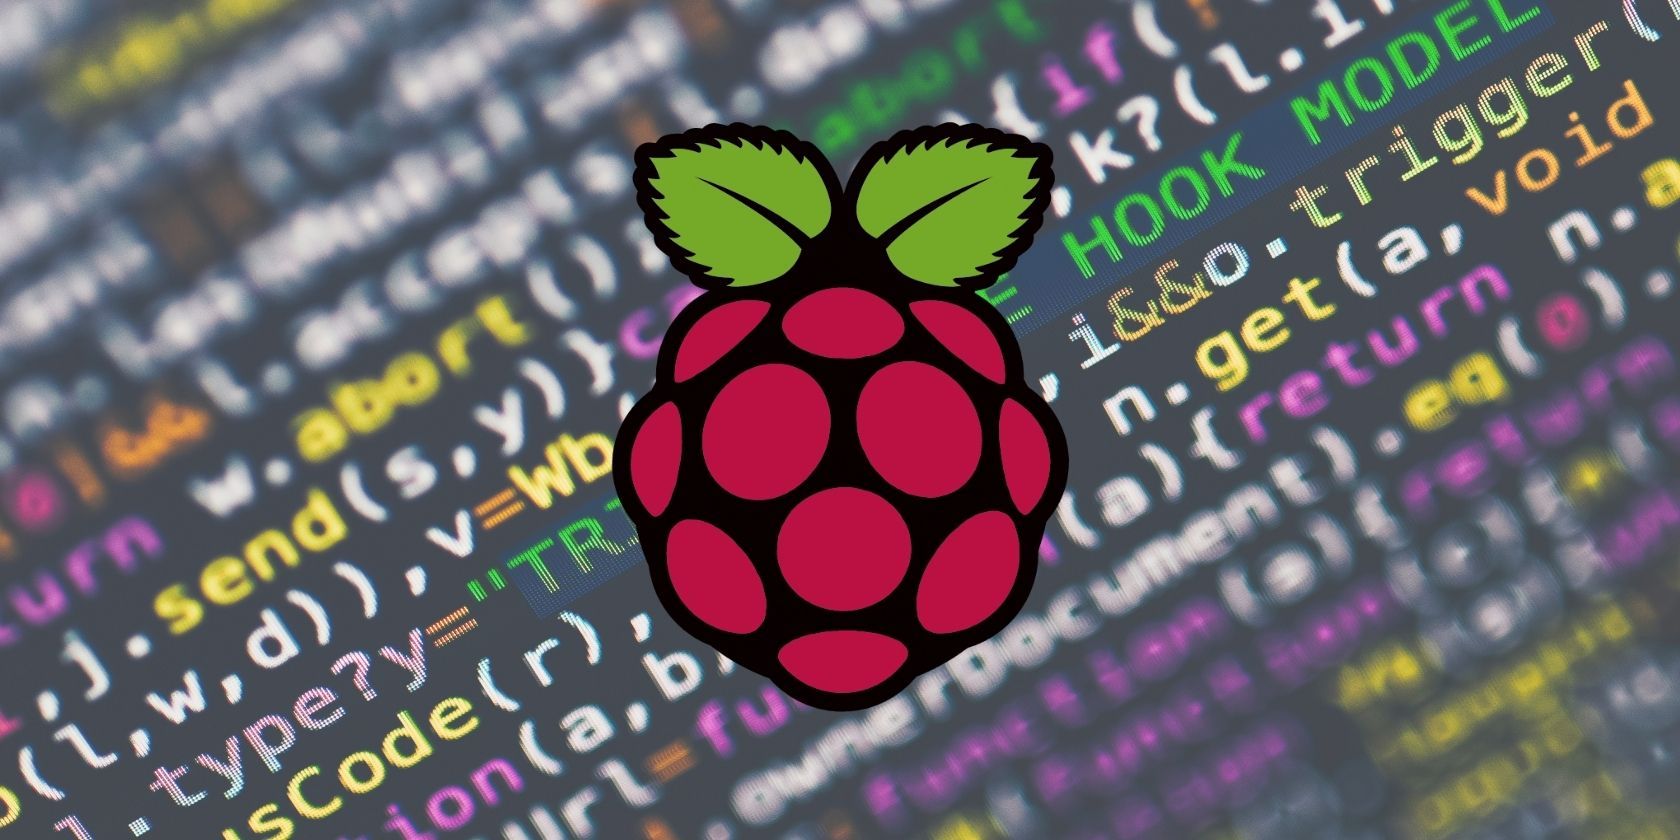 i want a single ide for python that will work on mac, windows and raspberry pi